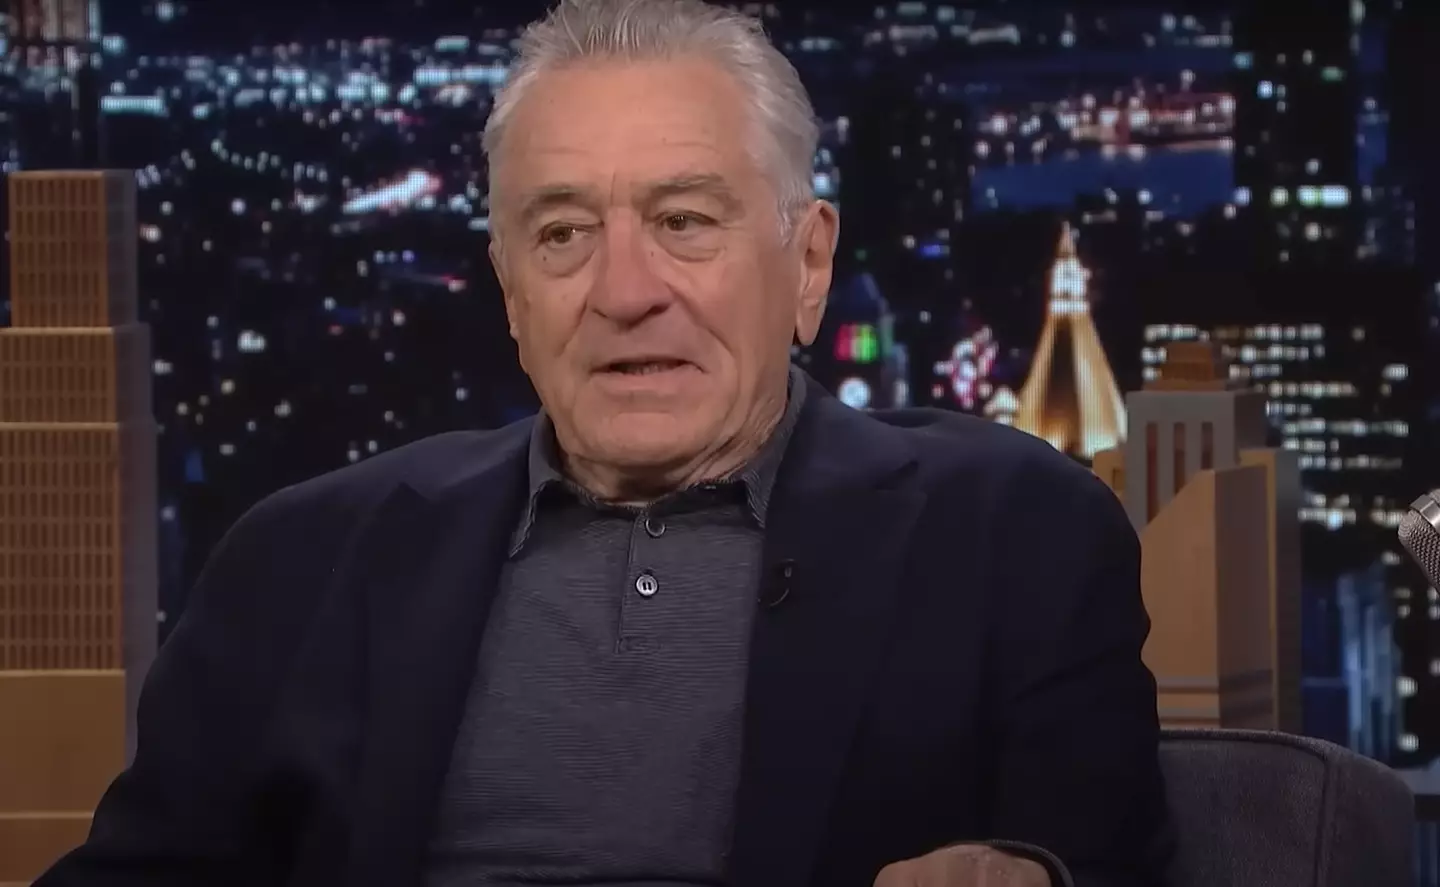 Robert De Niro has found himself at the centre of a lawsuit about gender discrimination.